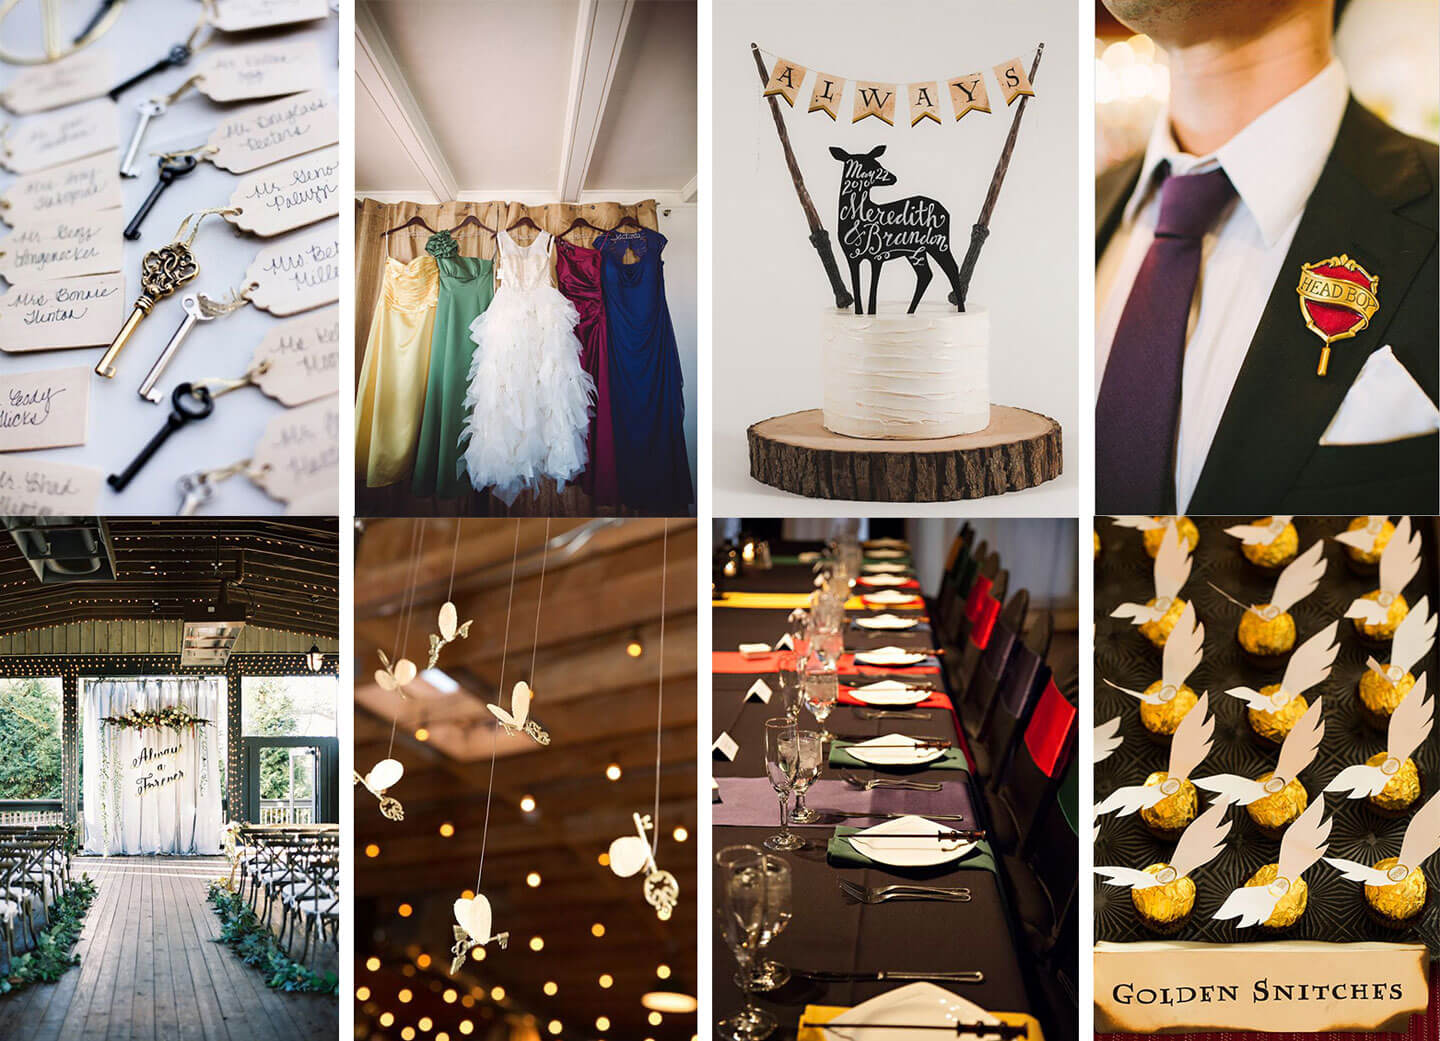 Book-inspired Wedding Themes - Harry Potter